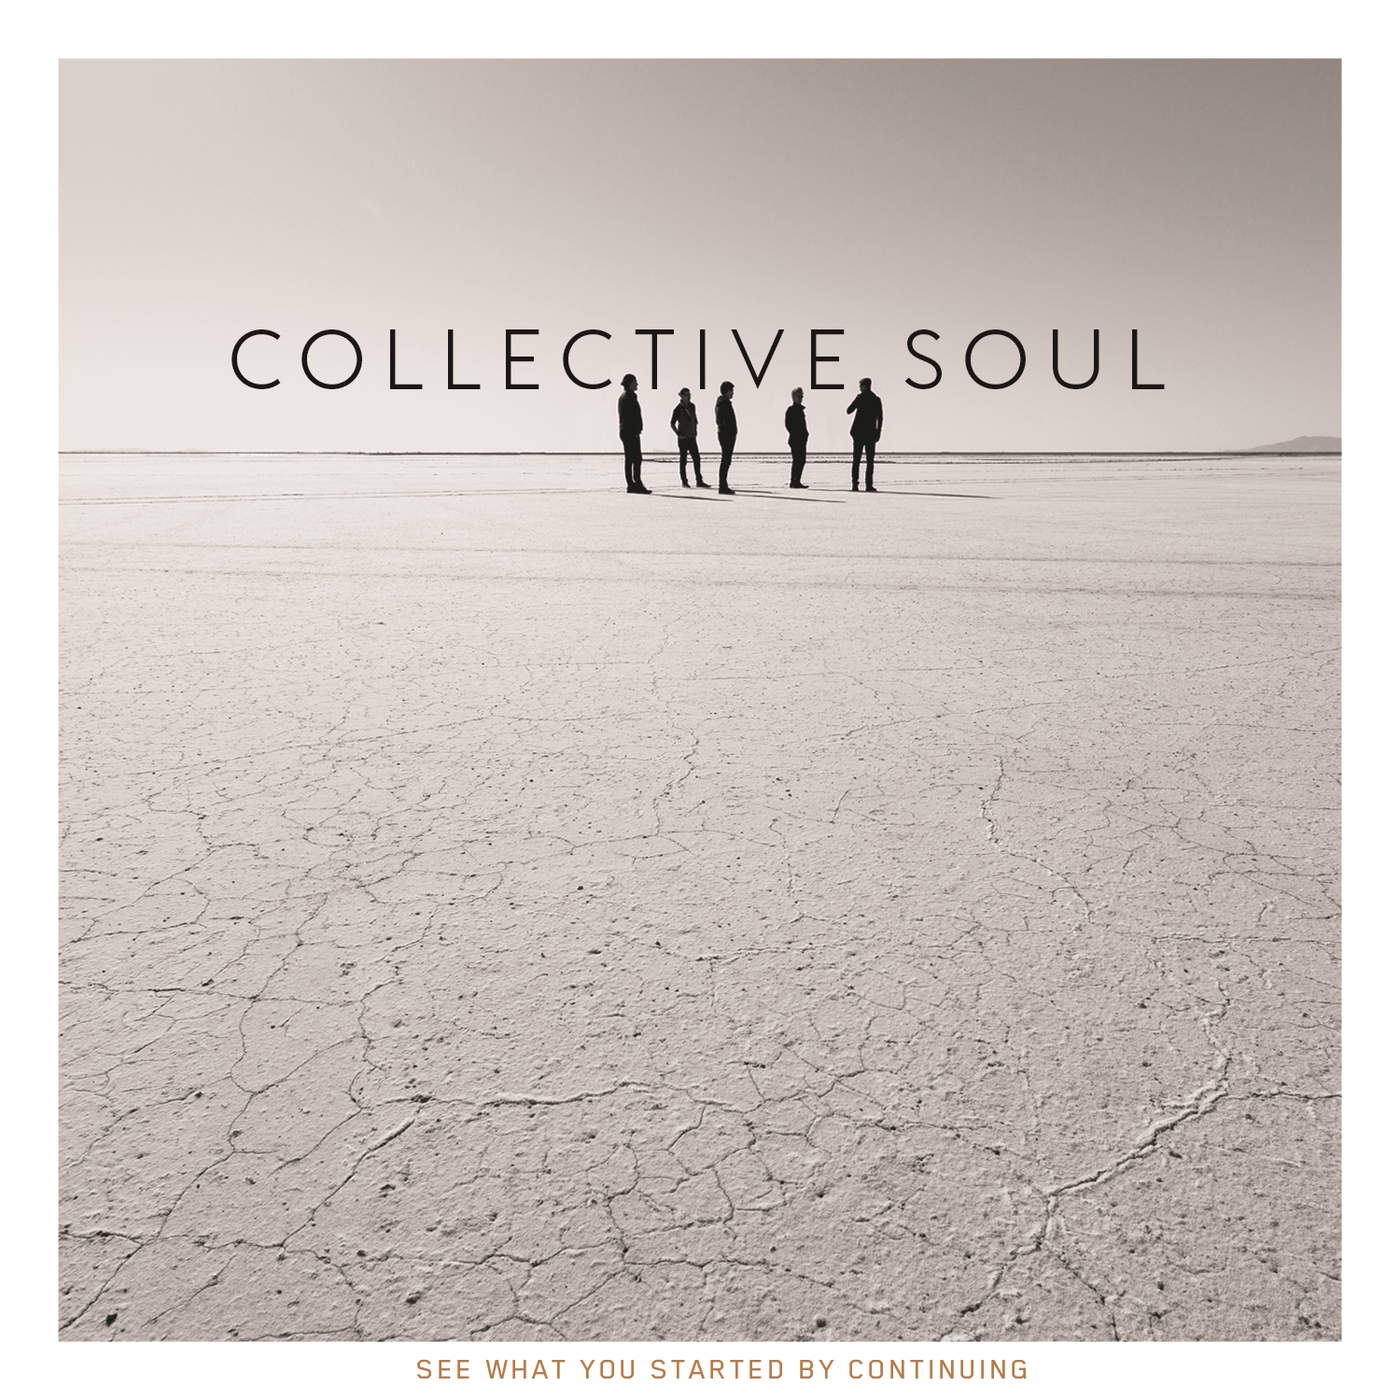 Collective Soul - See What You Started By Continuing (2015) Album Info